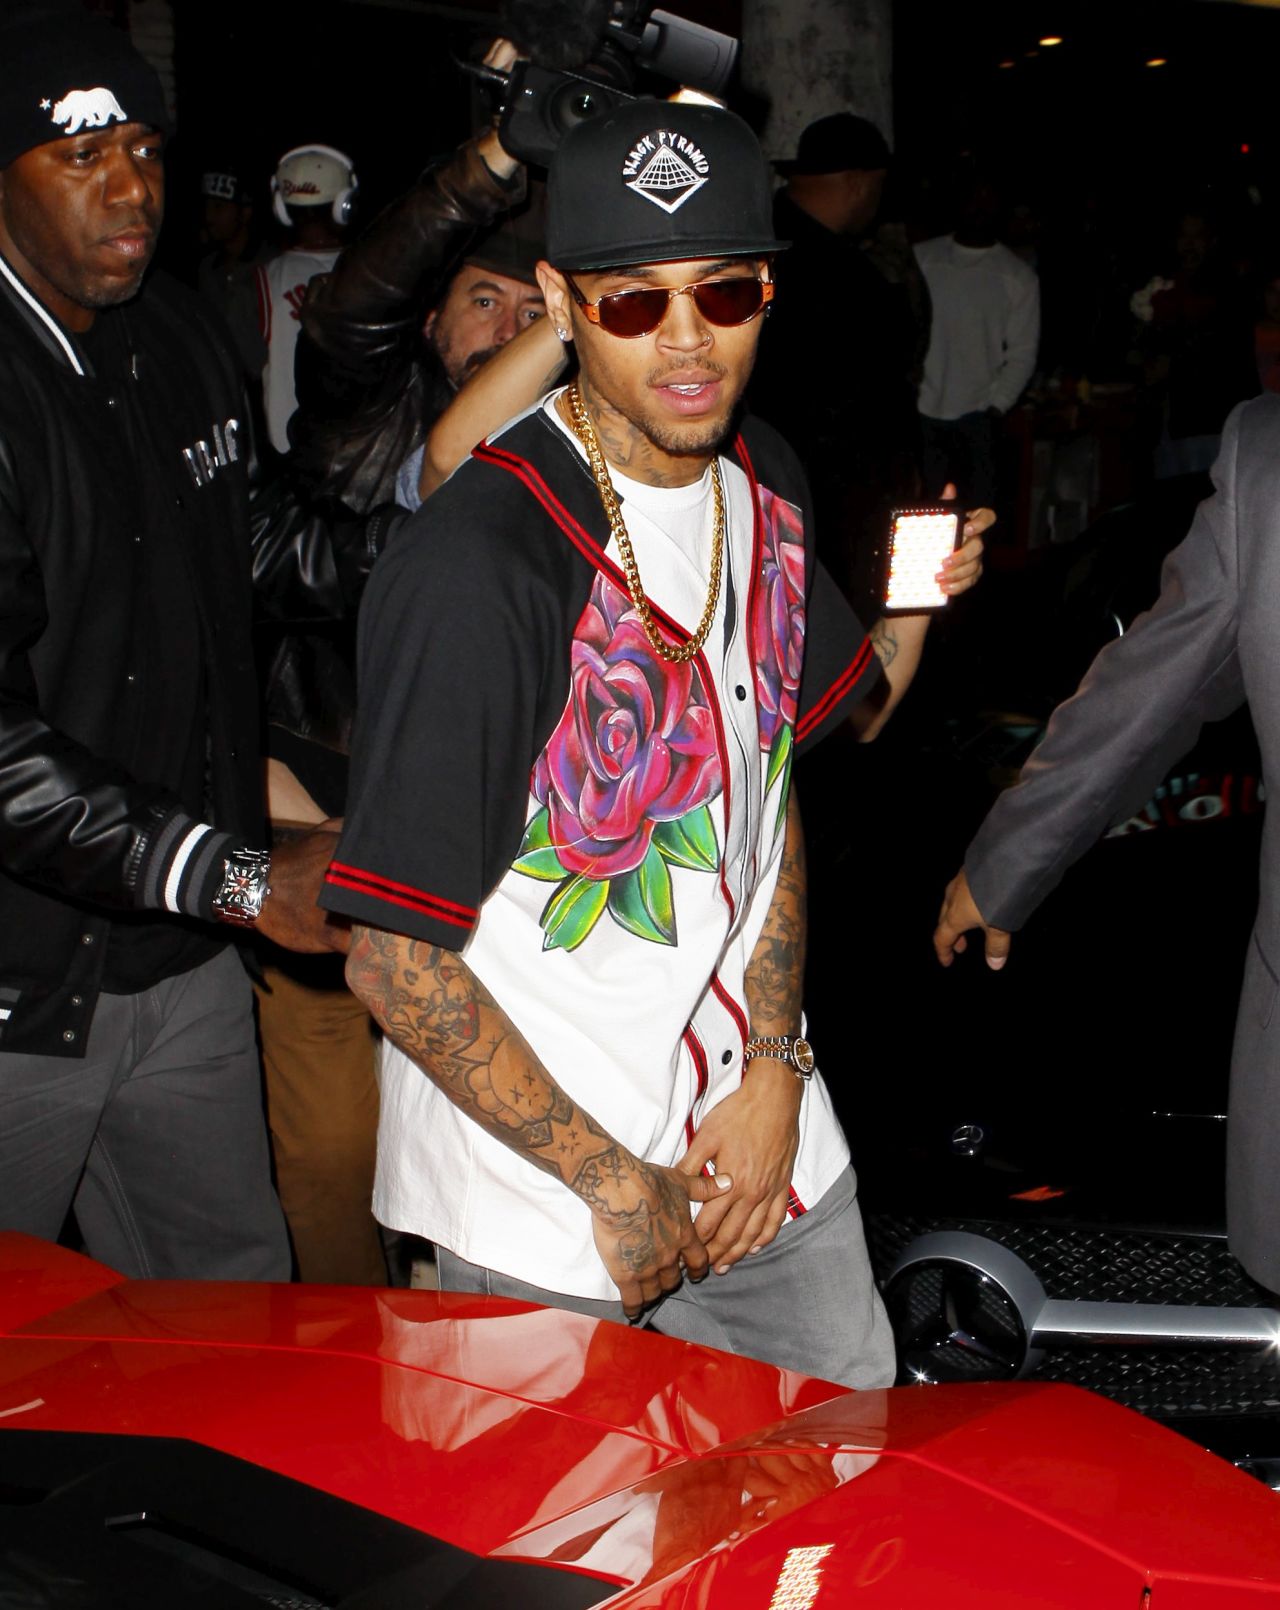 <strong>February 2013:</strong> <a href="http://www.cnn.com/2013/02/10/showbiz/chris-brown-crash/index.html" target="_blank">Brown totaled his black Porsche</a> while being "ruthlessly pursued by paparazzi" on February 9, his rep said. Brown told Beverly Hills police he backed the car into a wall while "he was being chased by paparazzi, causing him to lose control of his vehicle," a police statement said. No charges were filed.